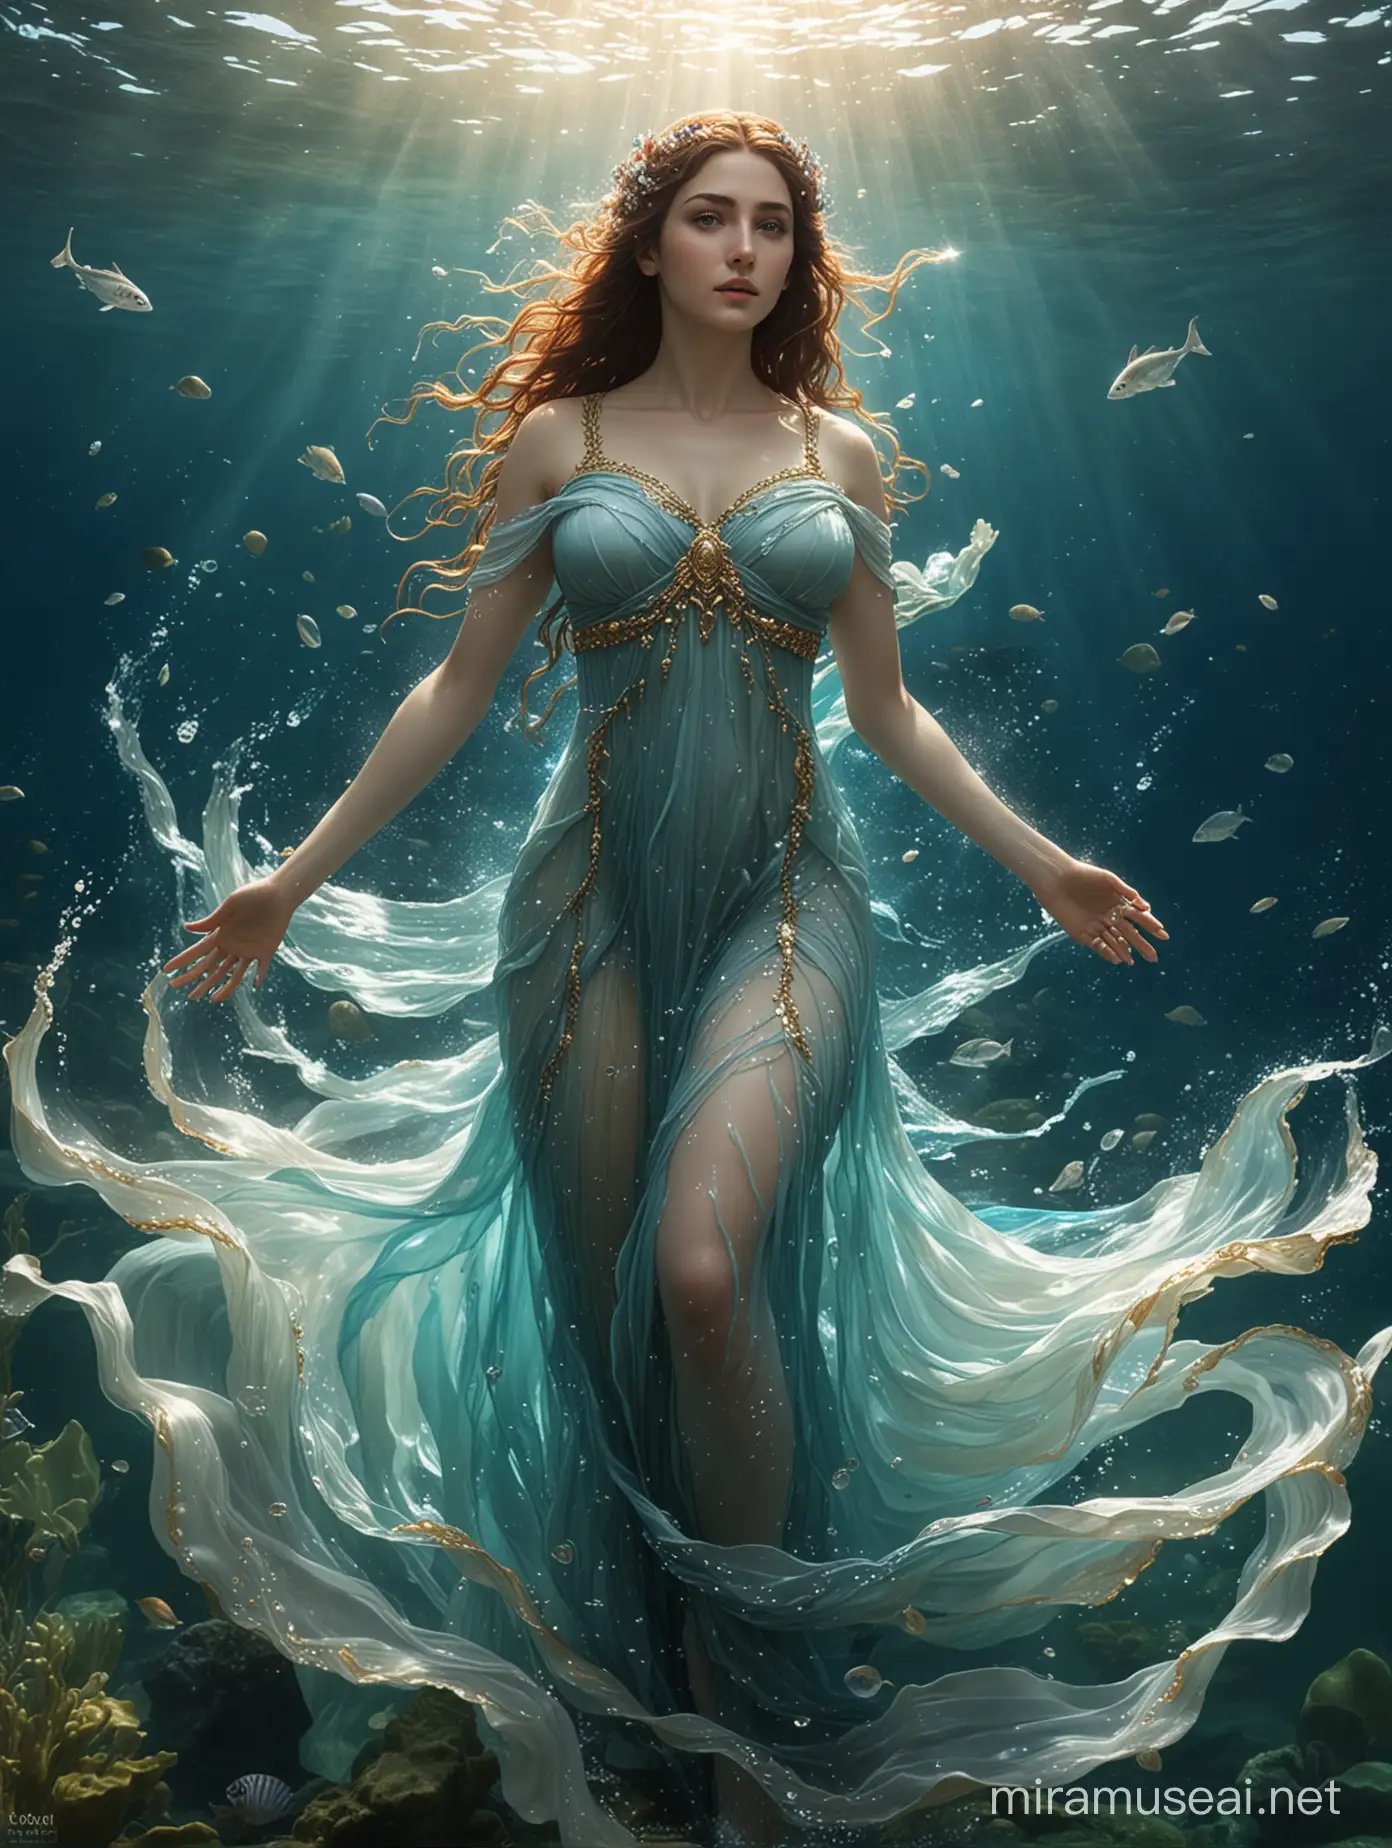 A masterpieced of Kimiya Hosseini as Leucothea, Greek goddess of the sea. She is under the sea, and her Greek dress flows ethereally in the water until it mixes with the water until it disappears. She has has blue eyes.
